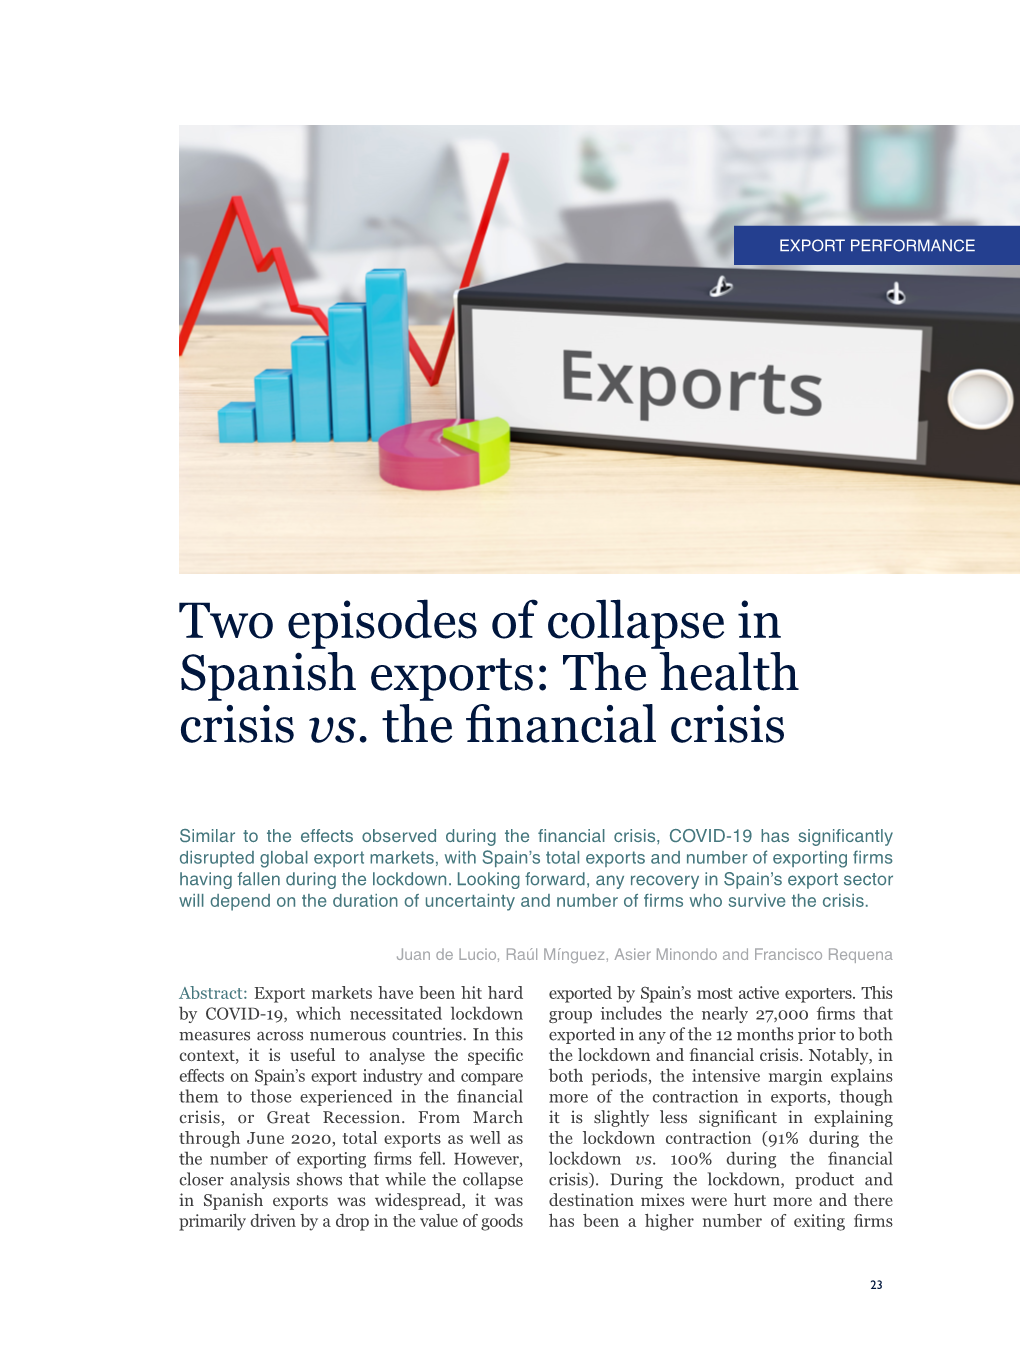 Two Episodes of Collapse in Spanish Exports: the Health Crisis Vs. the Financial Crisis